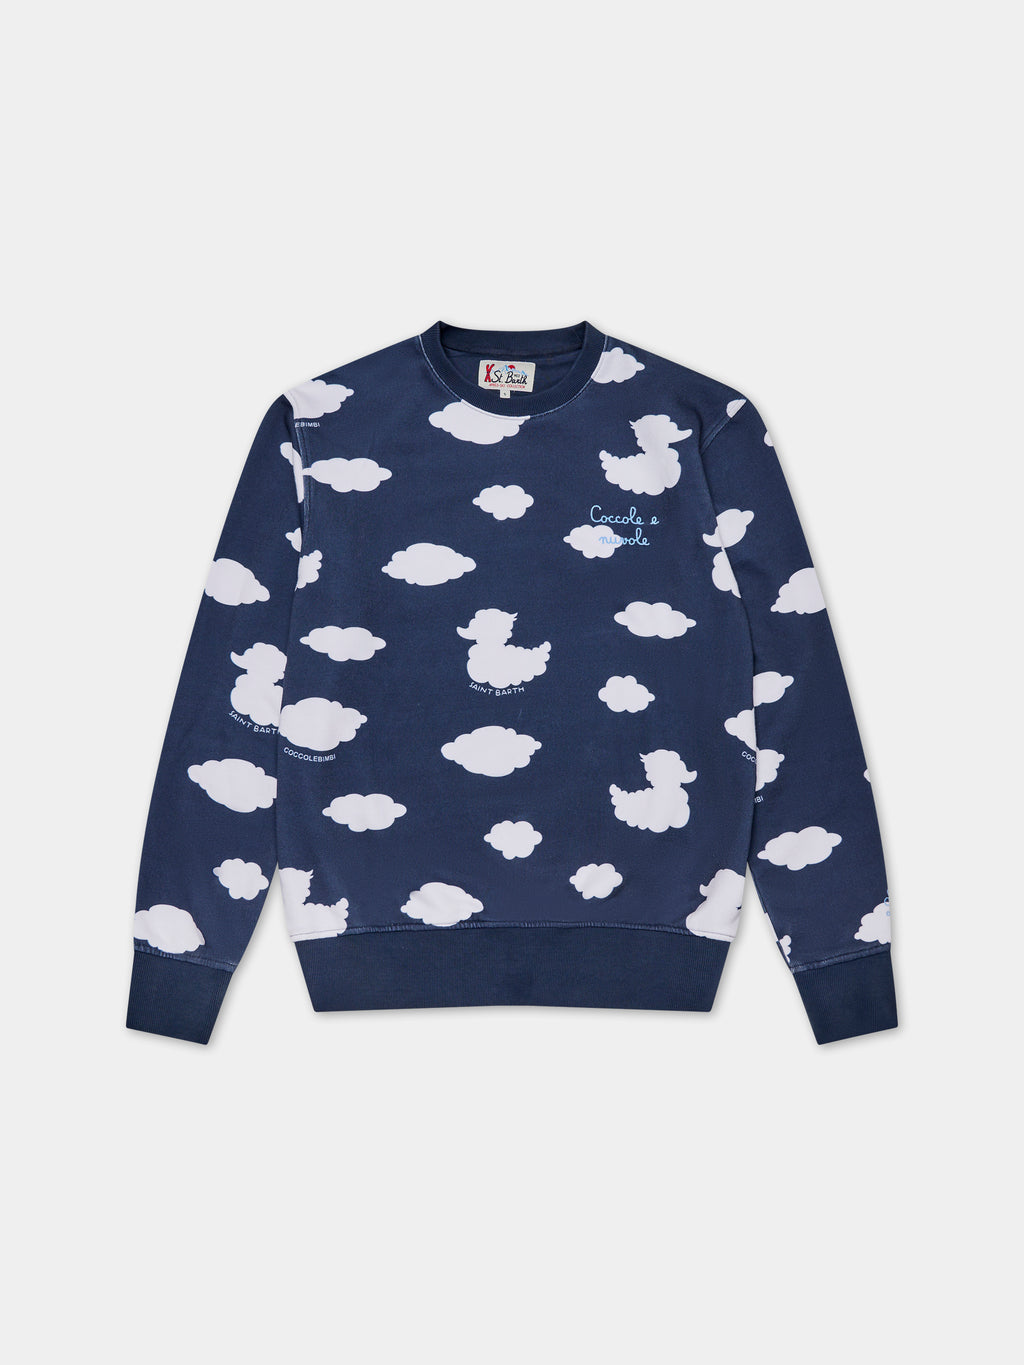 Blue sweatshirt for adults with clouds and ducky clouds